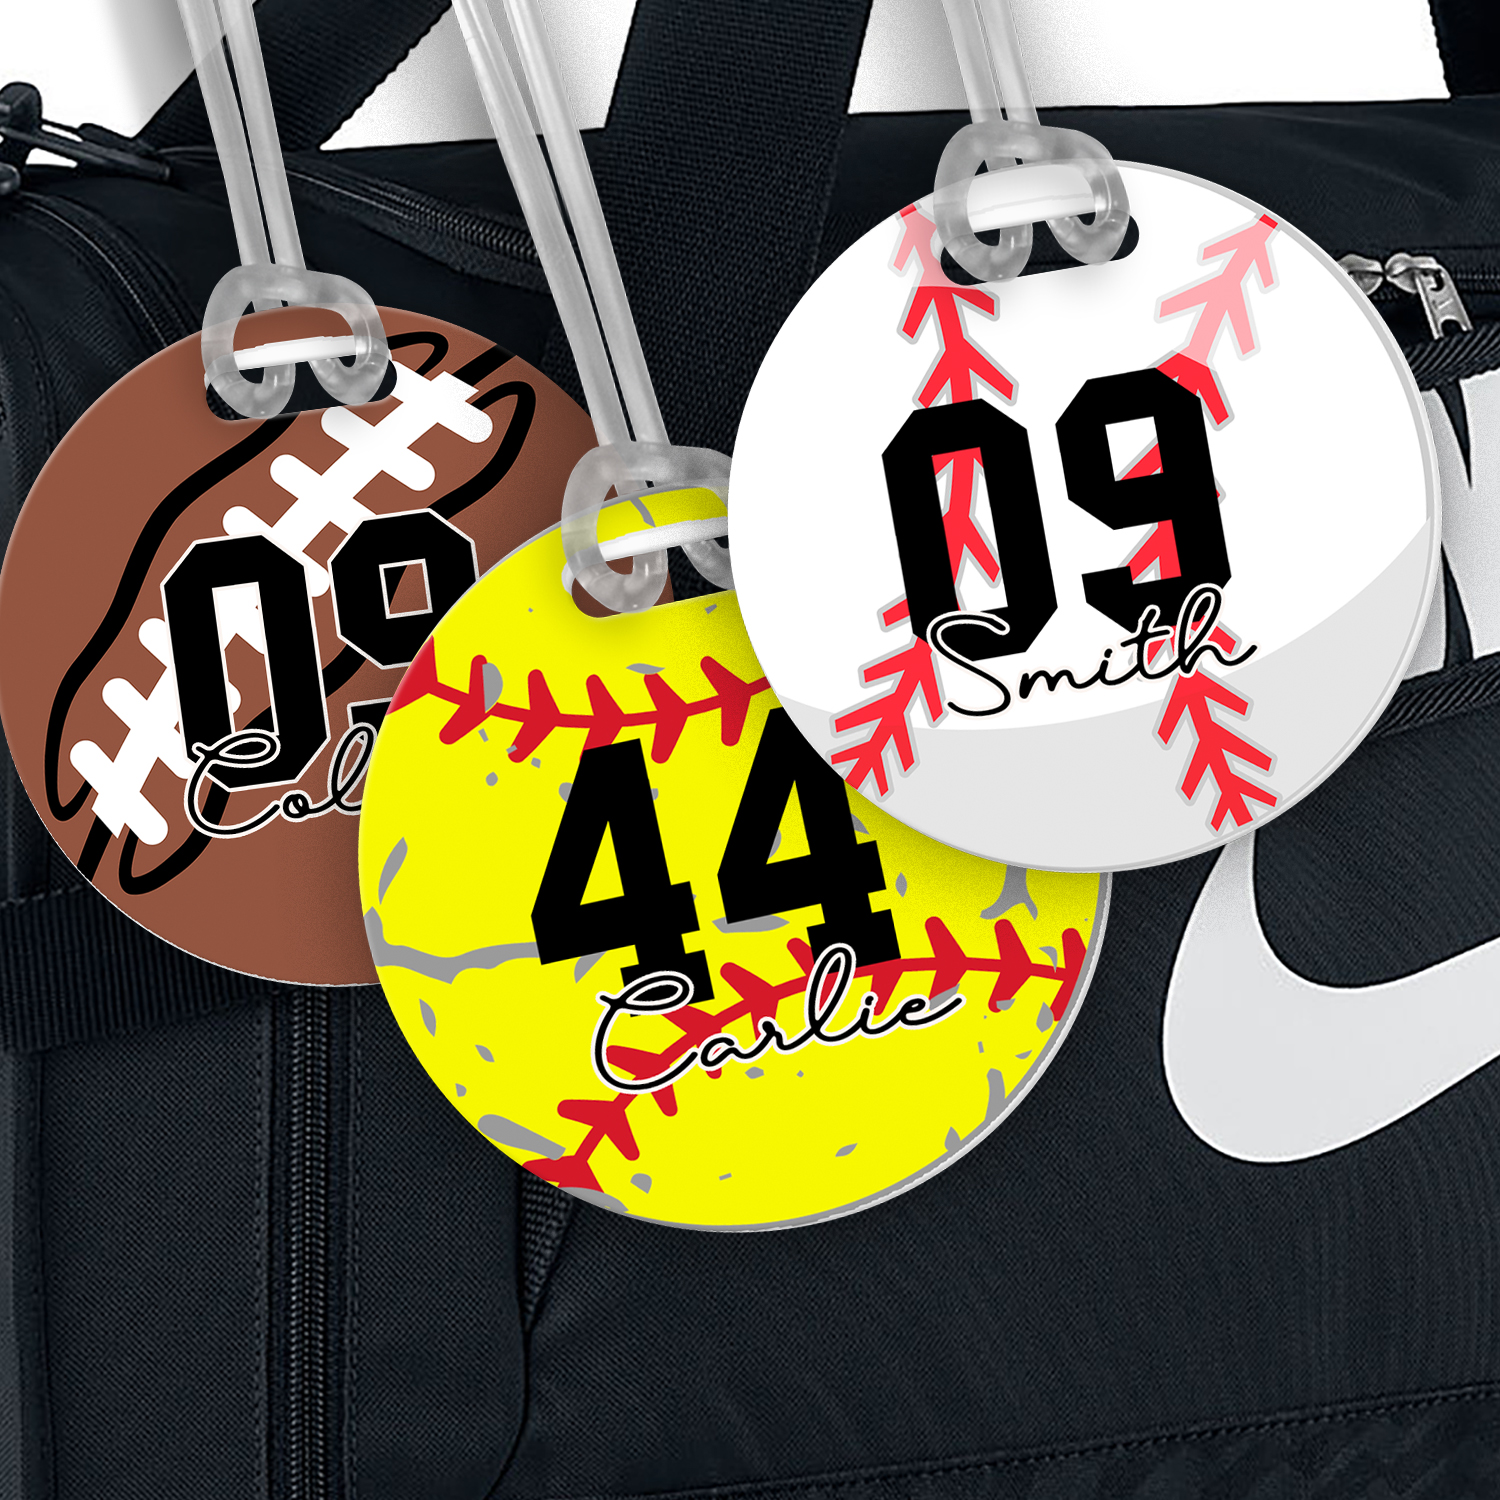 ID tags for sports bags